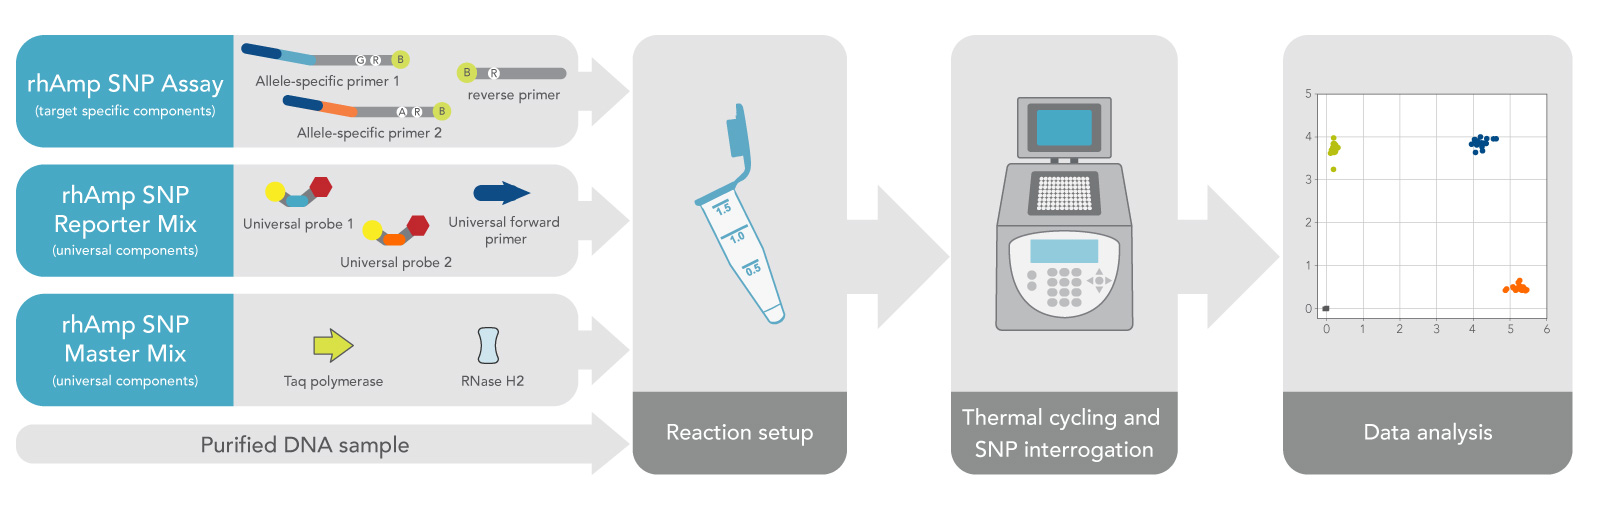 rhAmp genotyping workflow, from reaction setup to thermal cycling and SNP interrogation to data analysis